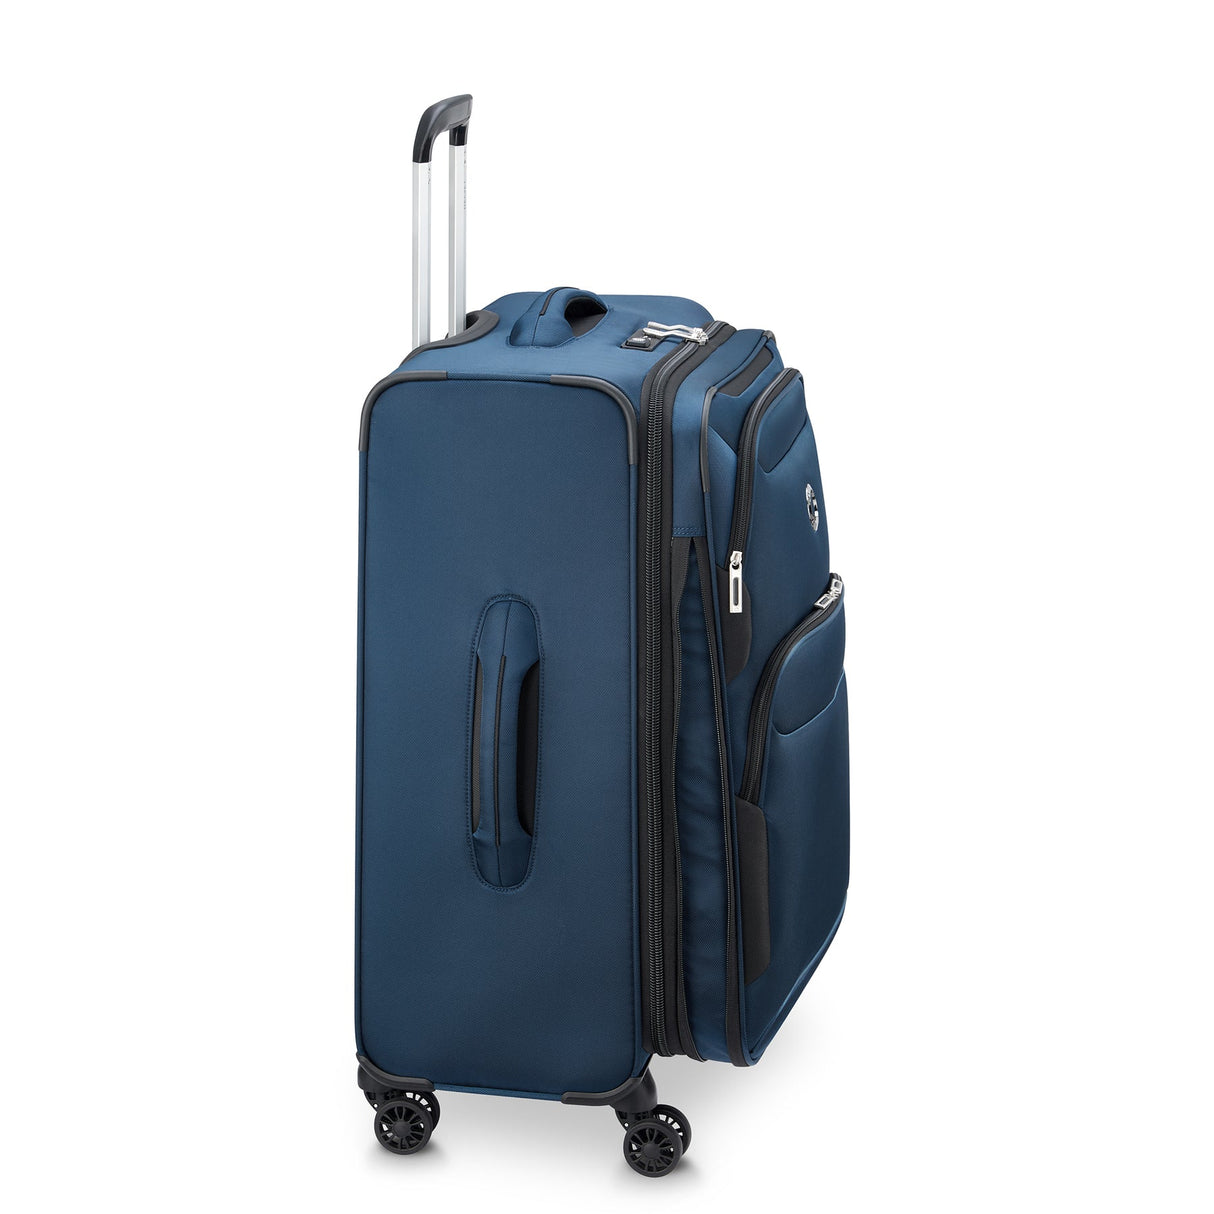 Delsey Sky Max 2.0 Medium Checked Expandable Spinner , , delsey-sky-max-2.0-40328482002-12_1800x1800_ee3997e9-3e21-4012-a066-4b700e9c5a51